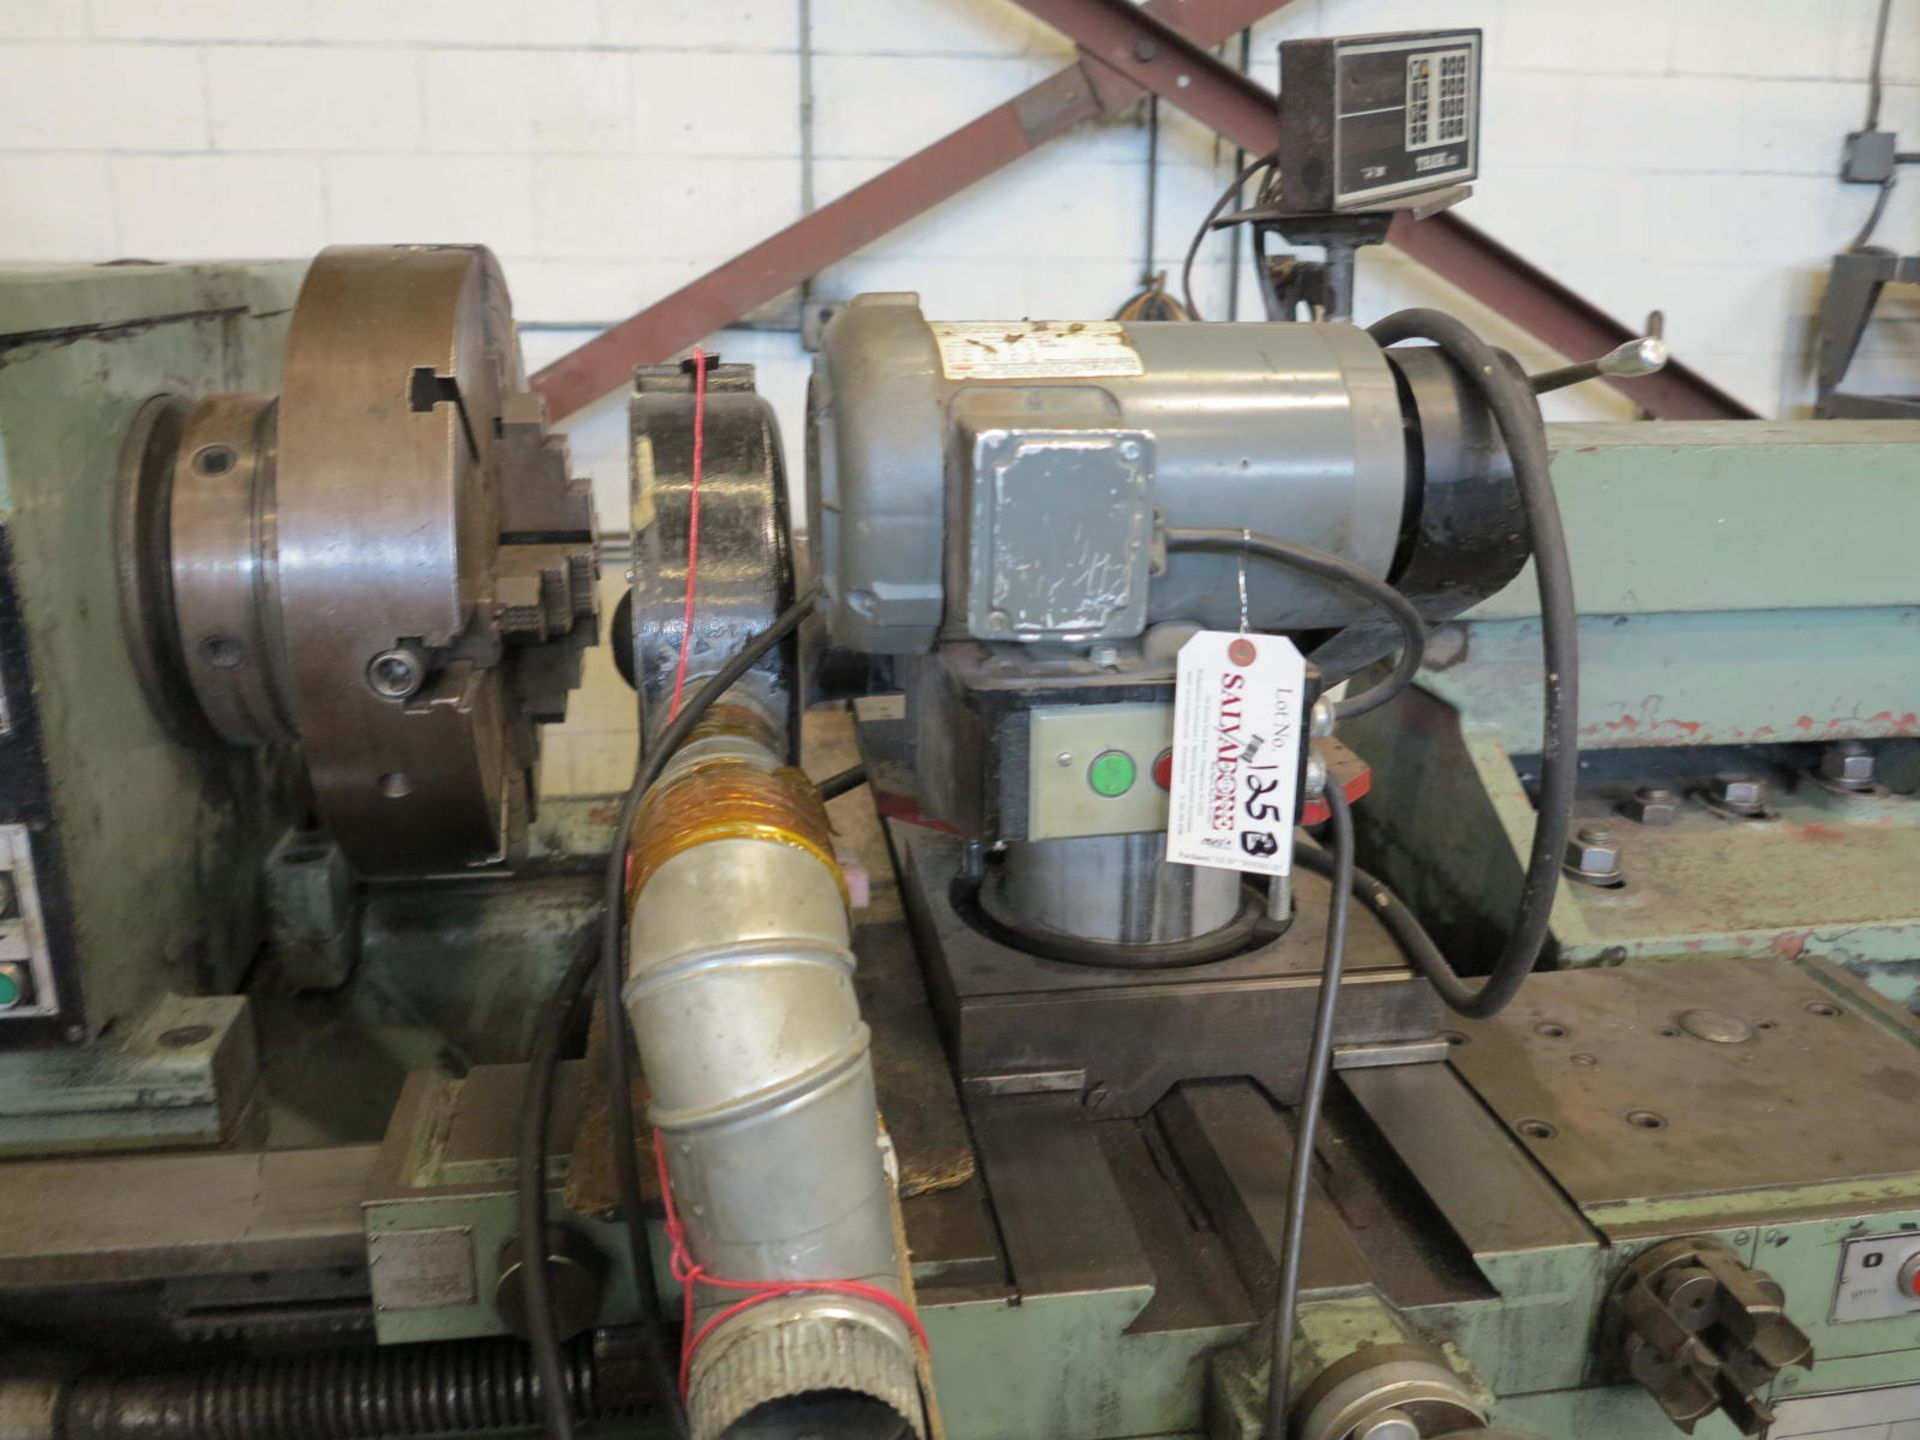 TOS SUS40 18' Bed Lathe, Quick Change Gears, Lead Screw, Wired for 480V, Set Up for Grinding - Image 3 of 3